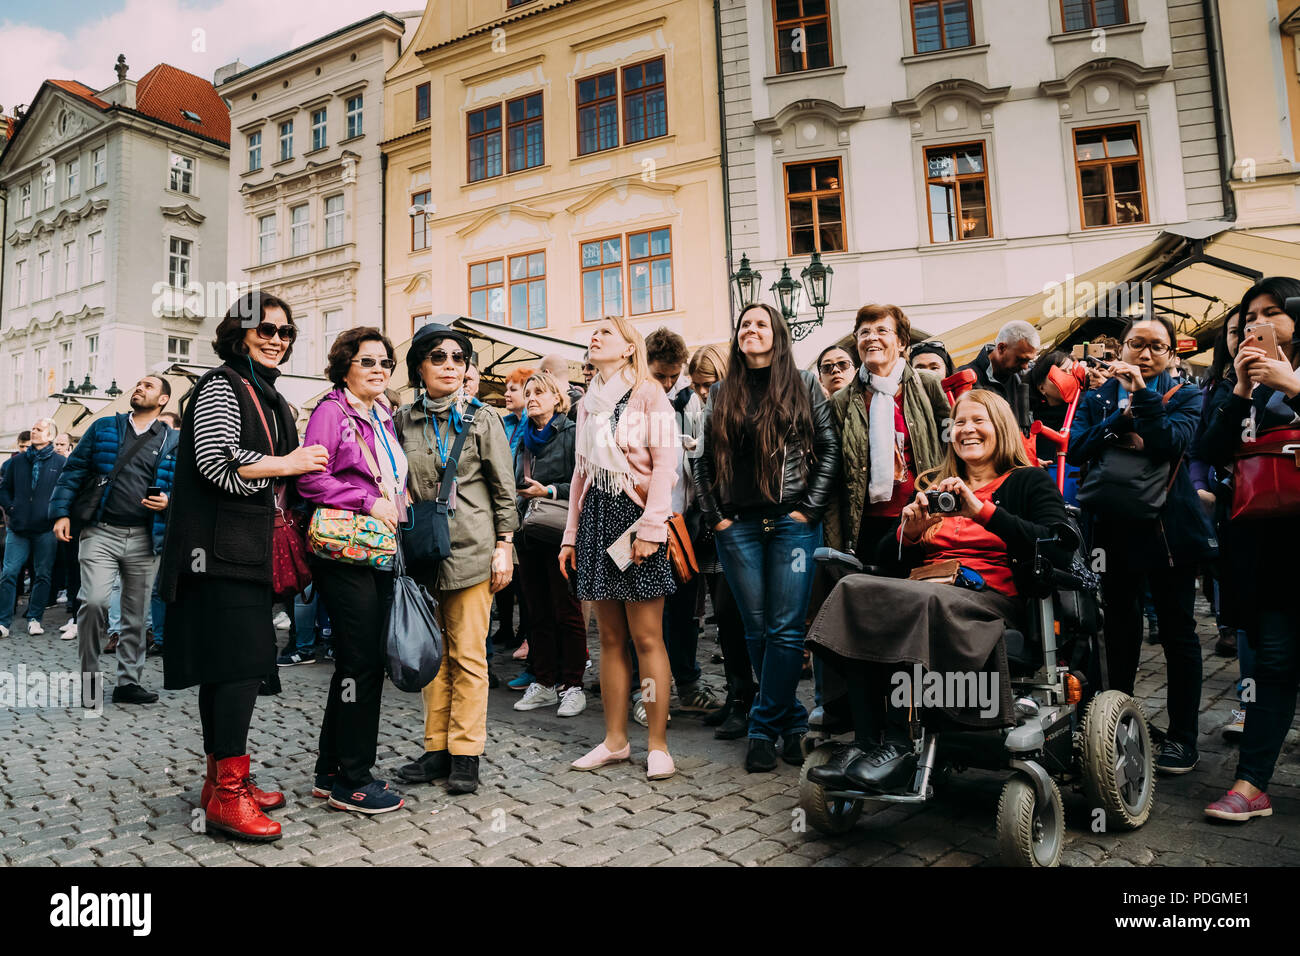 Prague, Czech Republic - September 22, 2017: Group Of Tourists Taking Photo Of Town Hall With Astronomical Clock - Orloj. Stock Photo